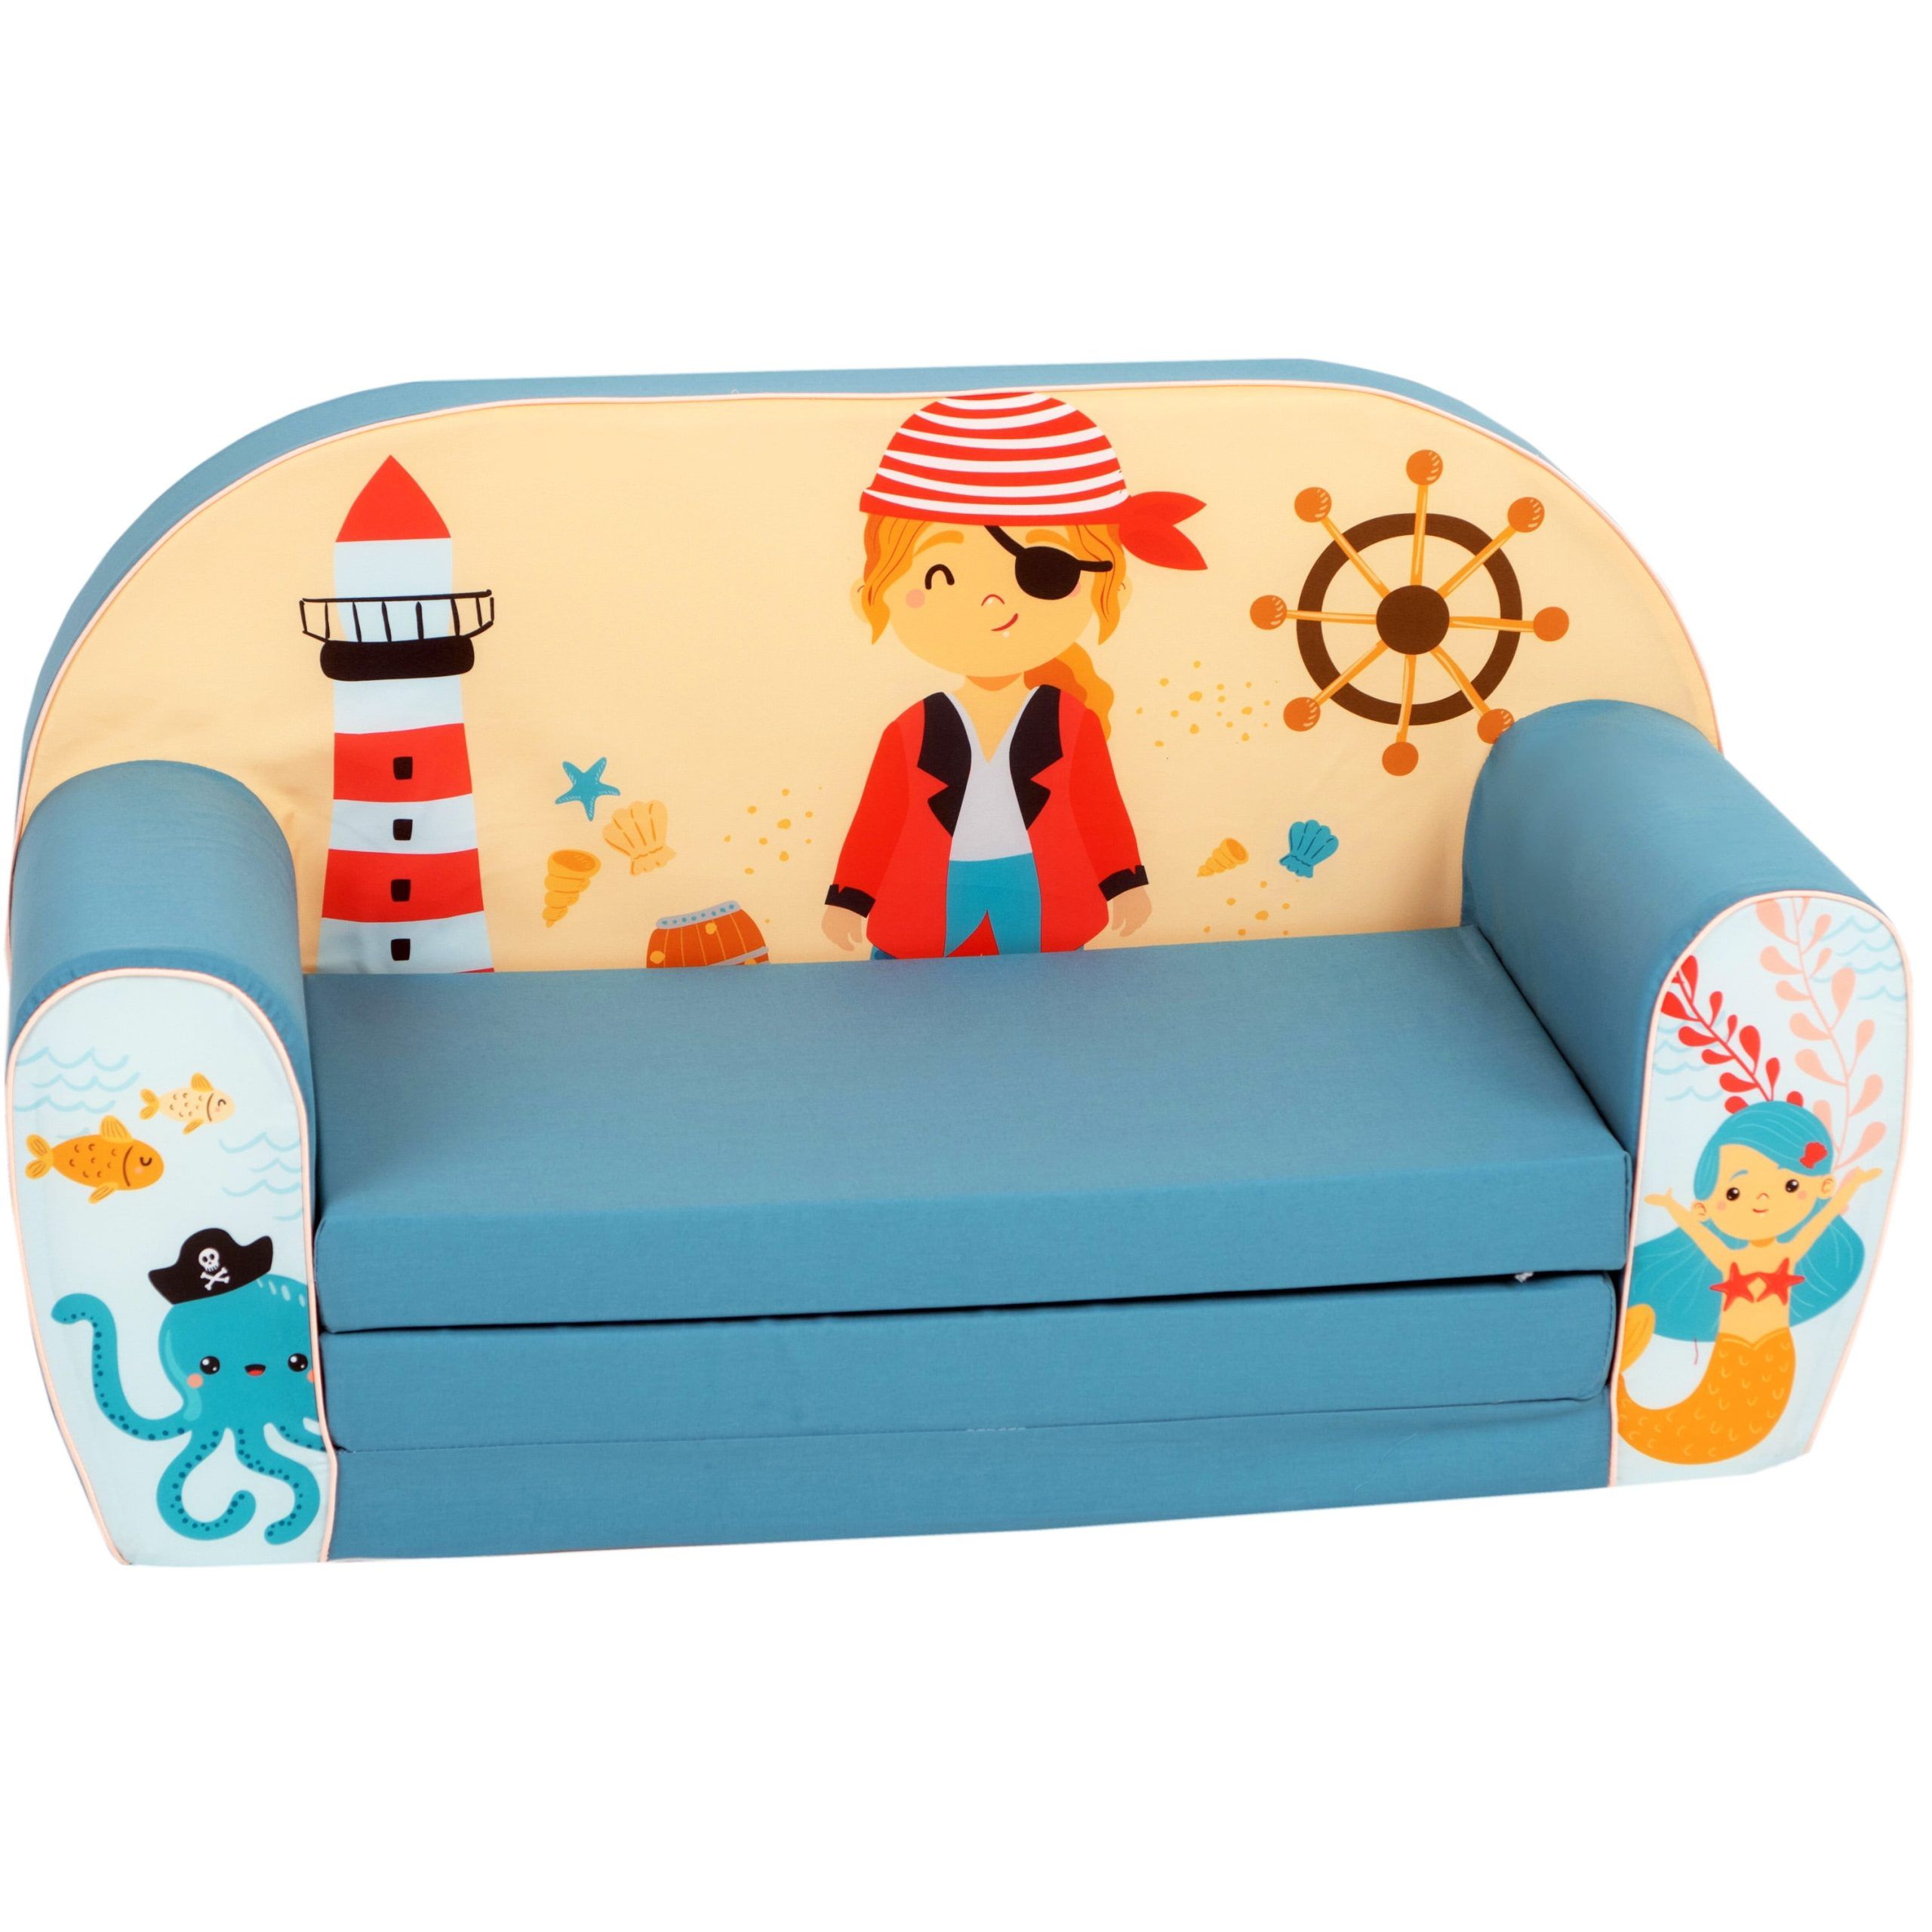 Delsit Toddler Couch & Kids Sofa – European Made Children's 2 In 1 Flip With Regard To 2 In 1 Foldable Children's Sofa Beds (View 5 of 20)